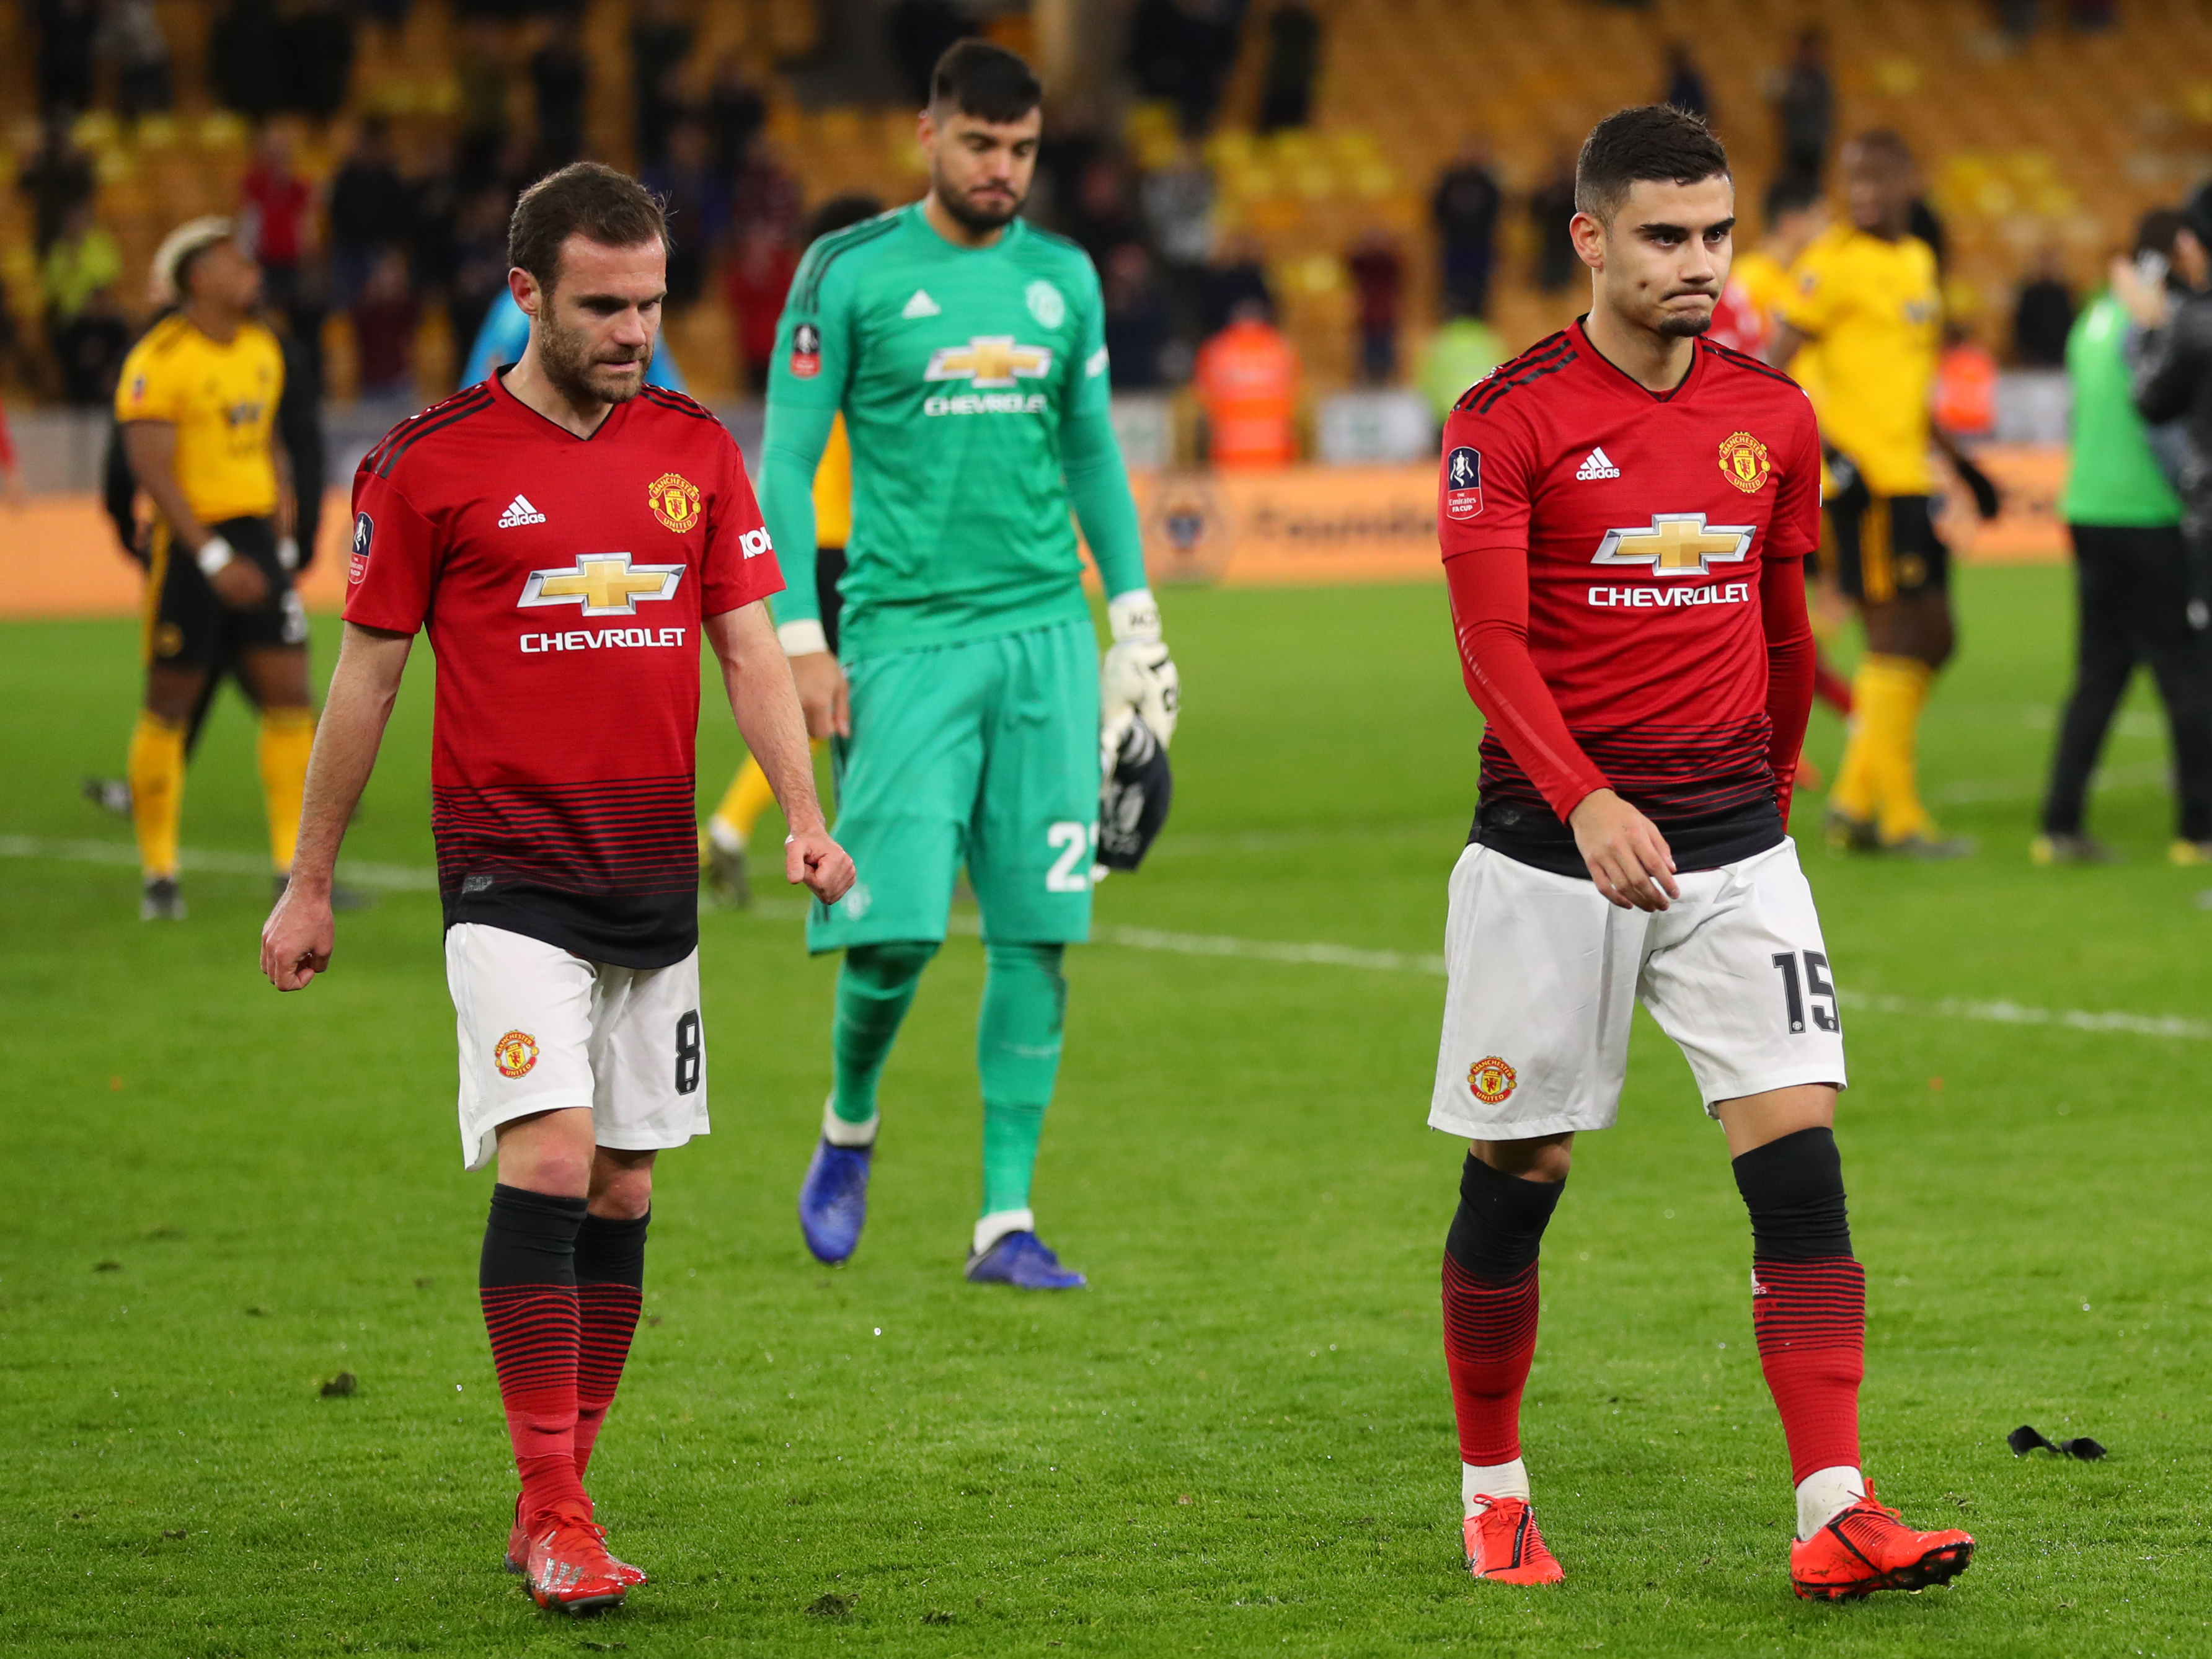 WOLVERHAMPTON, ENGLAND - MARCH 16: Juan Mata and Andreas Pereira of Manchester United leave the pitch following defeat in the FA Cup Quarter Final match between Wolverhampton Wanderers and Manchester United at Molineux on March 16, 2019 in Wolverhampton, England. (Photo by Catherine Ivill/Getty Images)